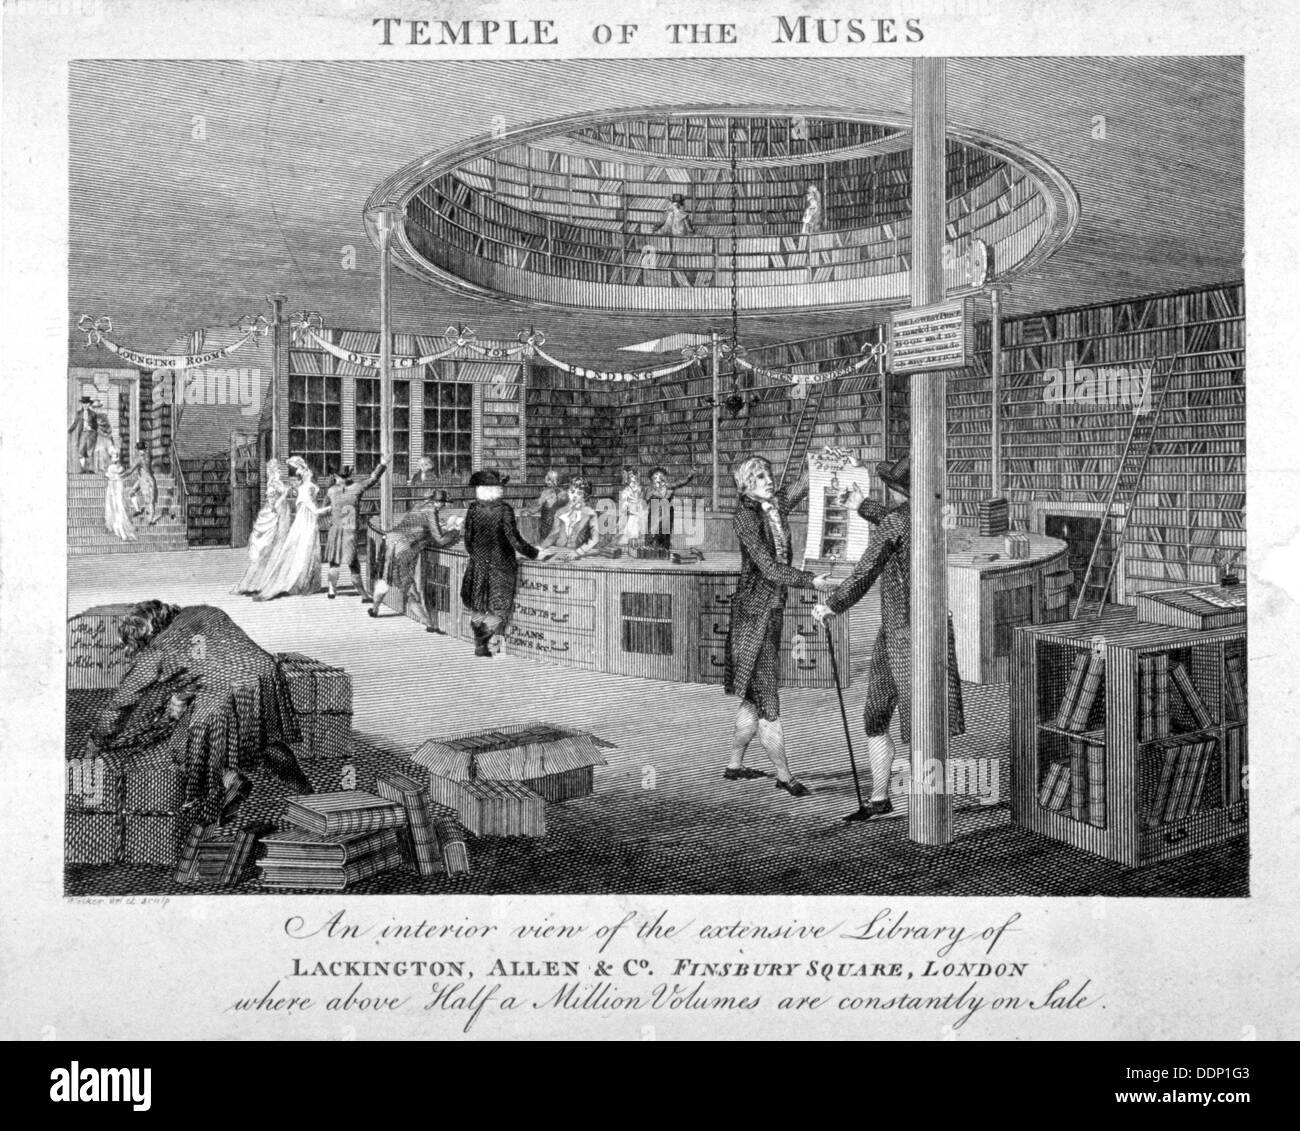 The Temple of the Muses Bookshop in Finsbury Square, London, c1810.                                  Artist: Walker Stock Photo